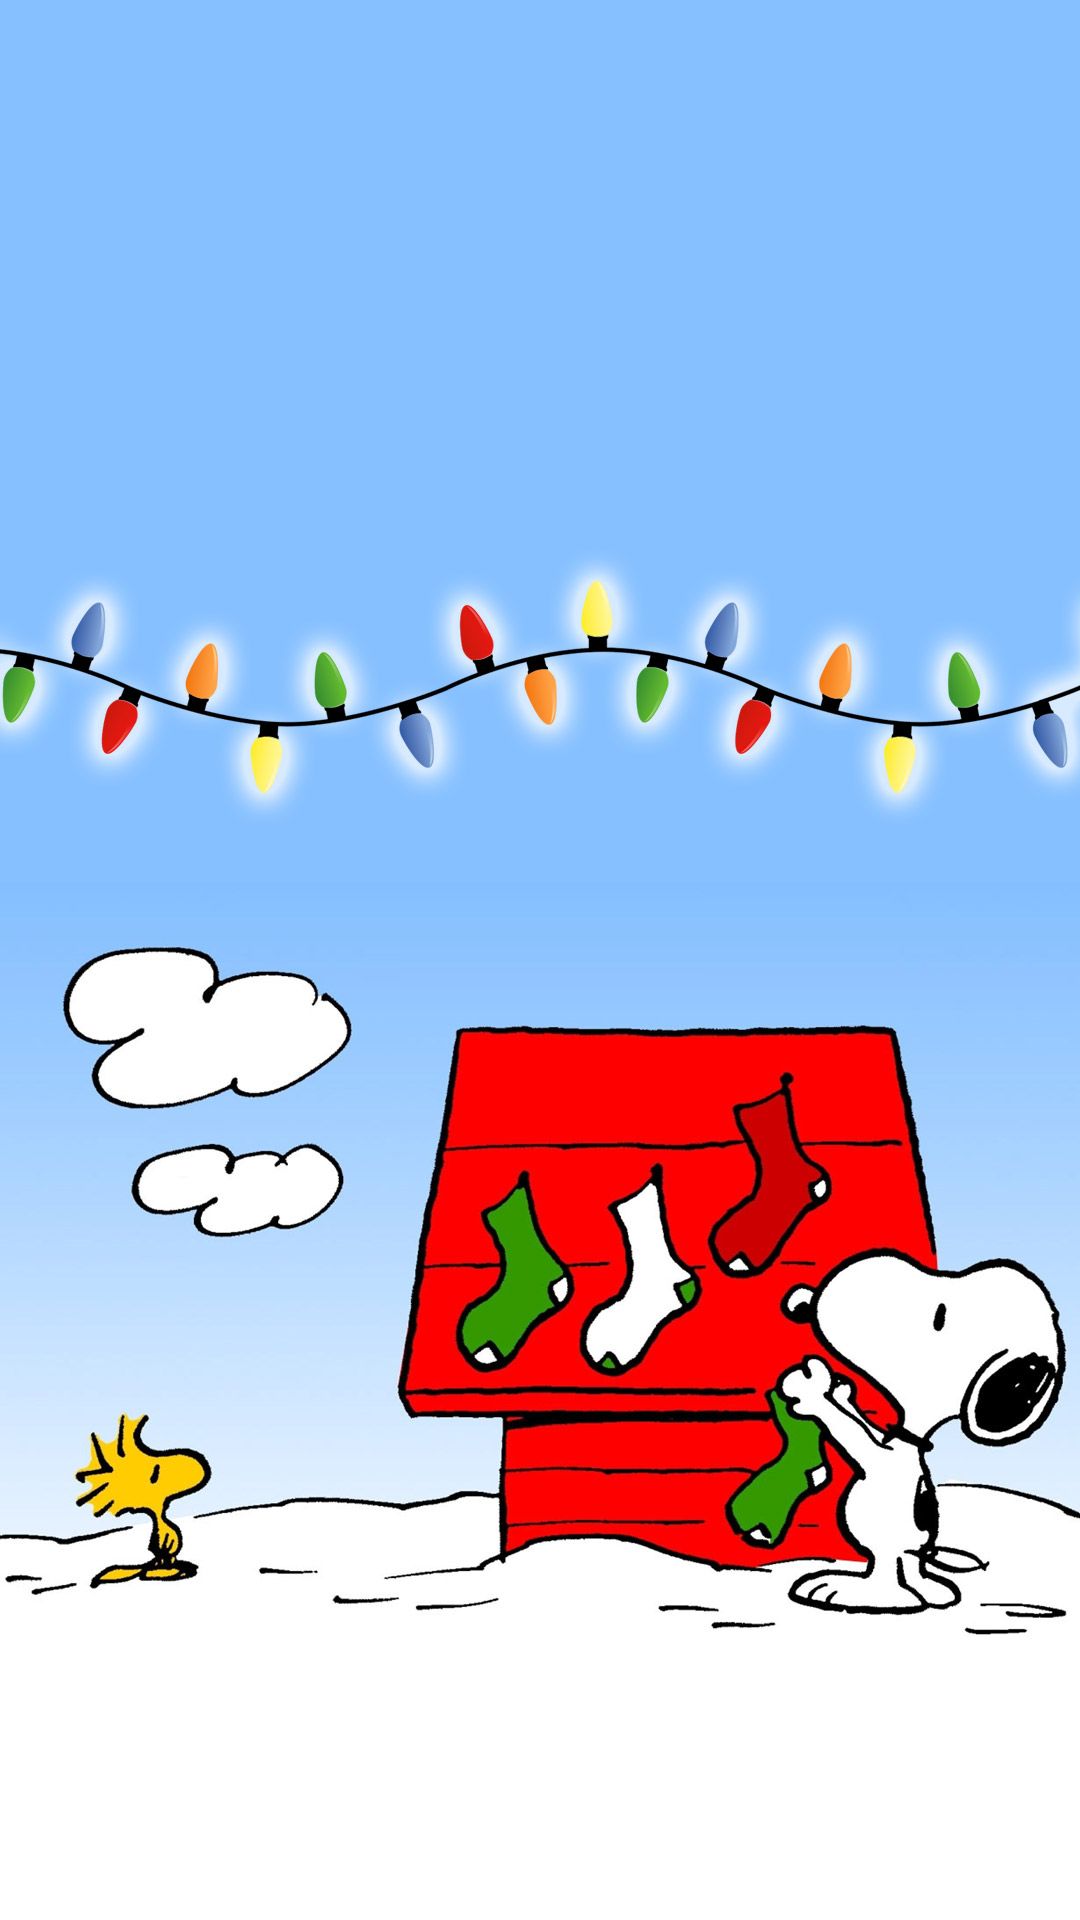 A peanuts snoopy Christmas wallpaper for your phone - Snoopy